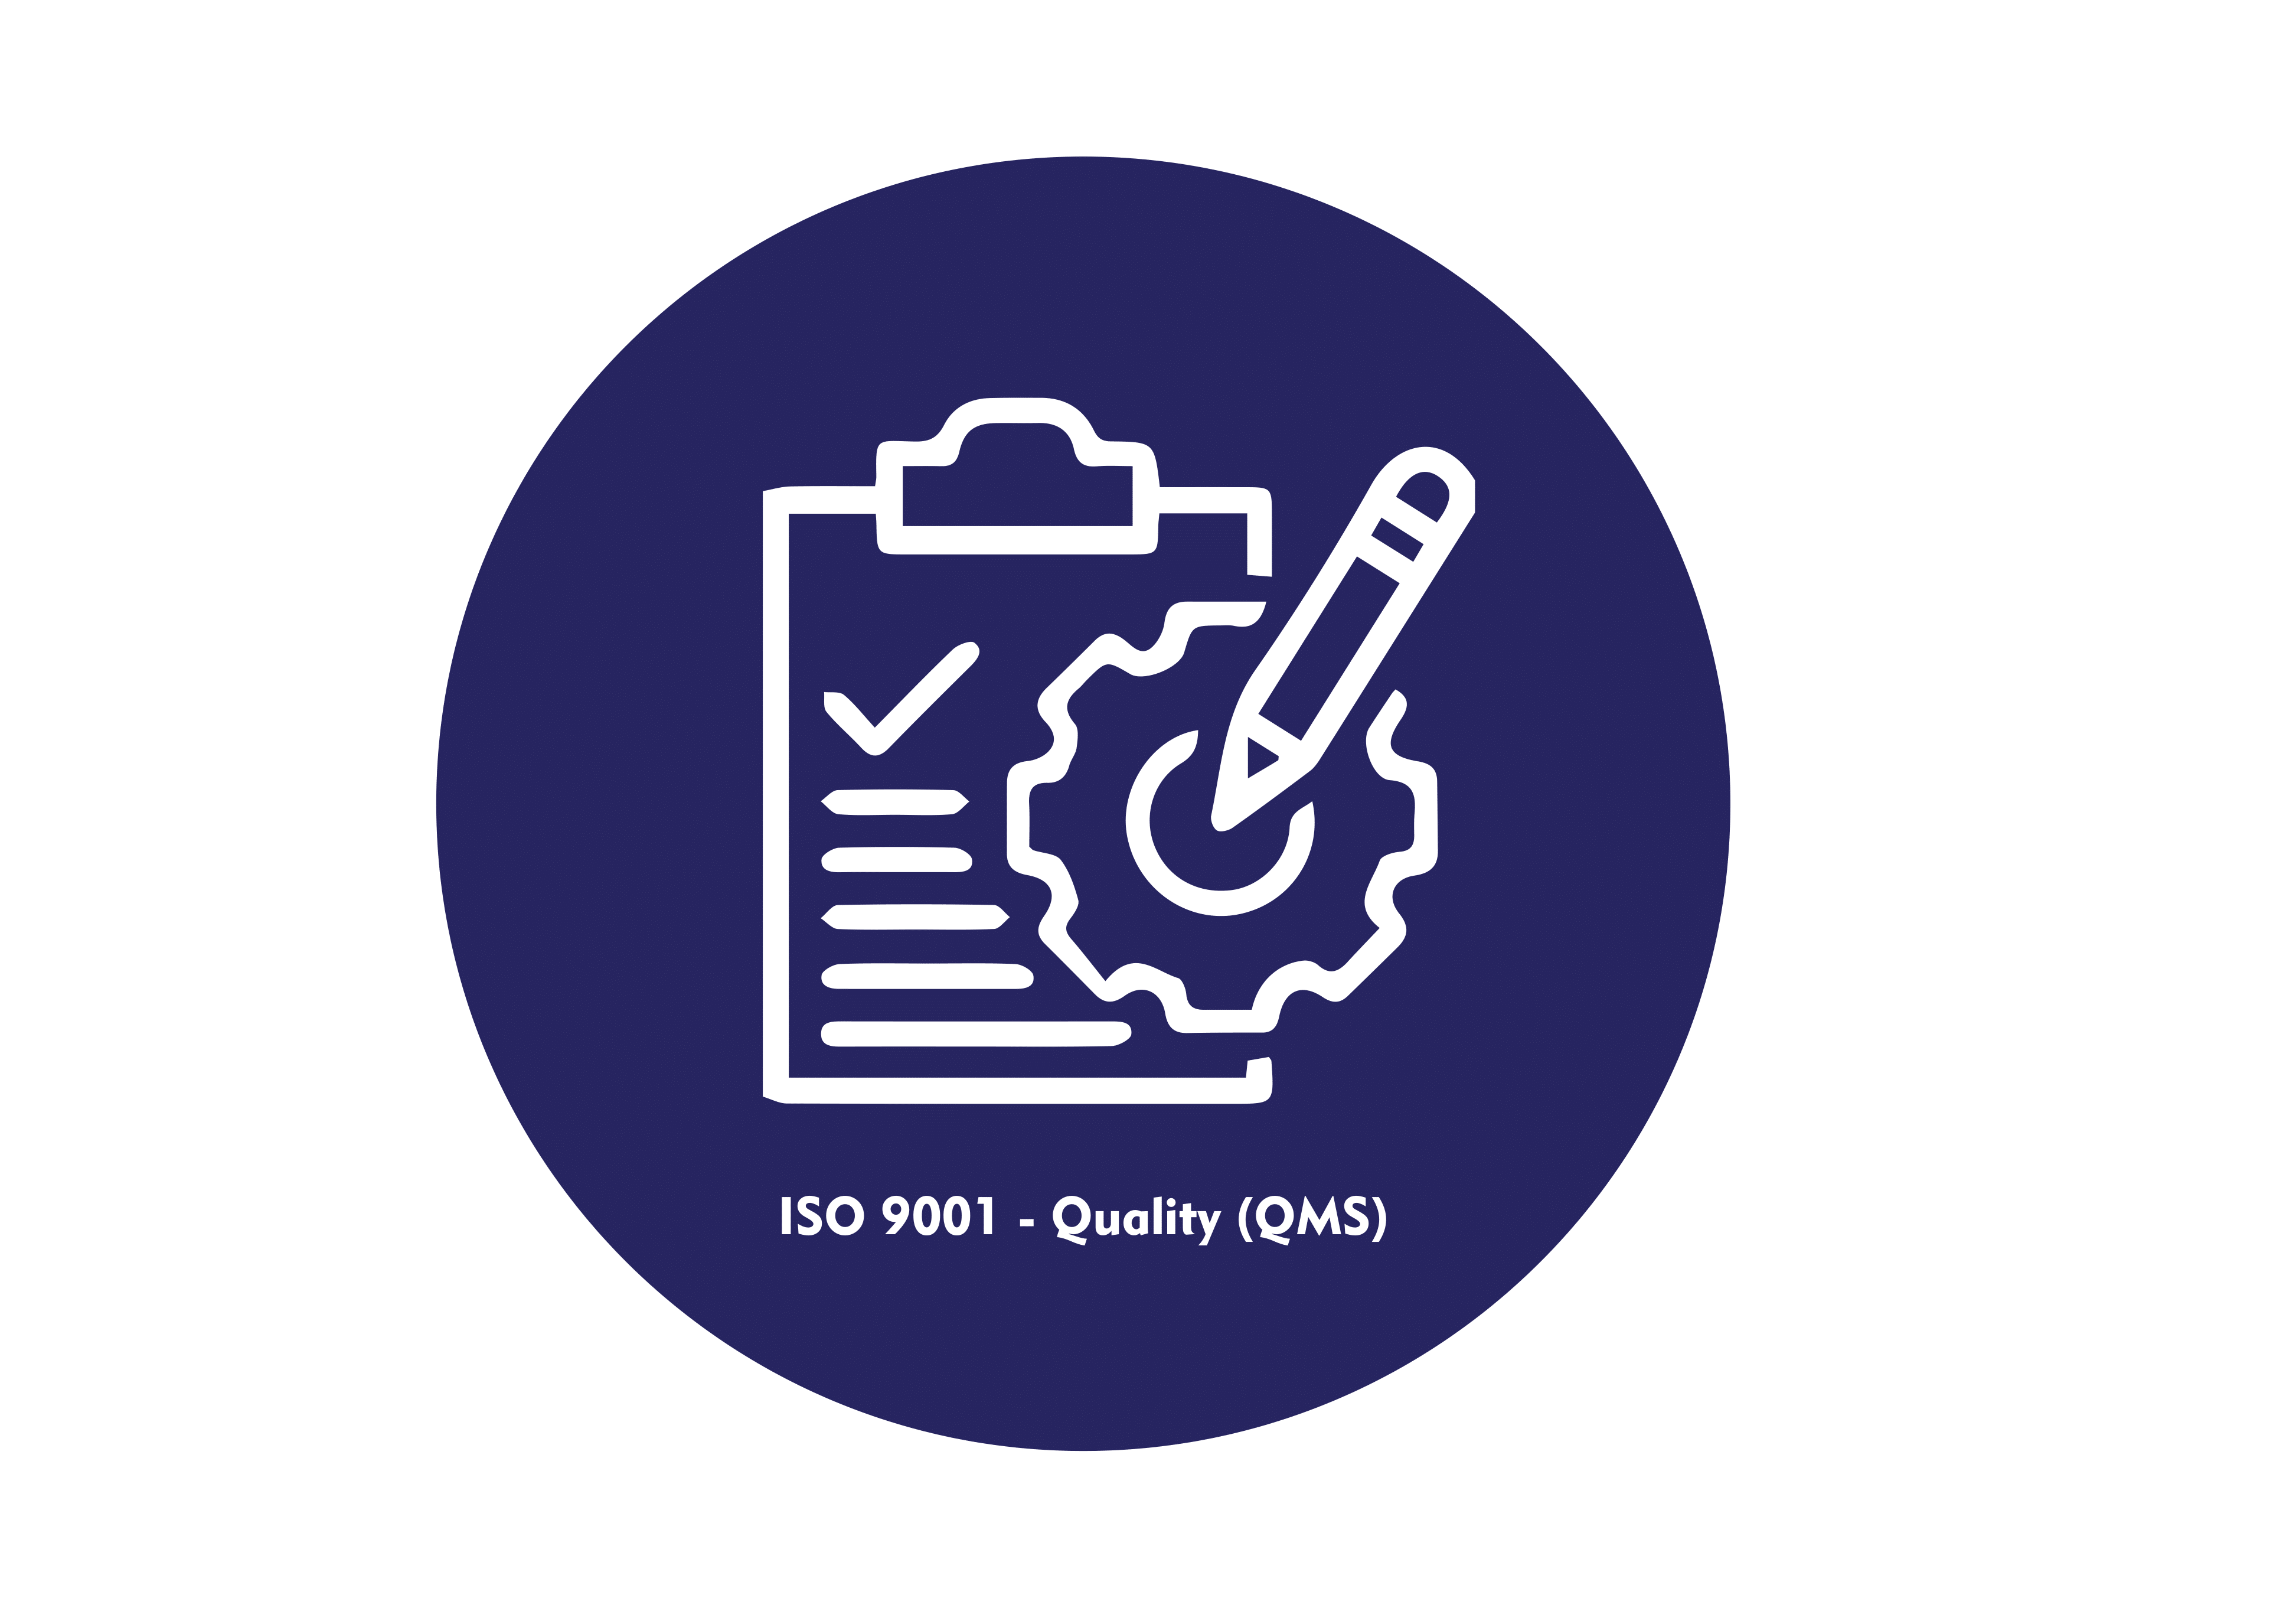 https://goaltechno.com/wp-content/uploads/2022/01/ISO-9001-Quality-QMS-1.png